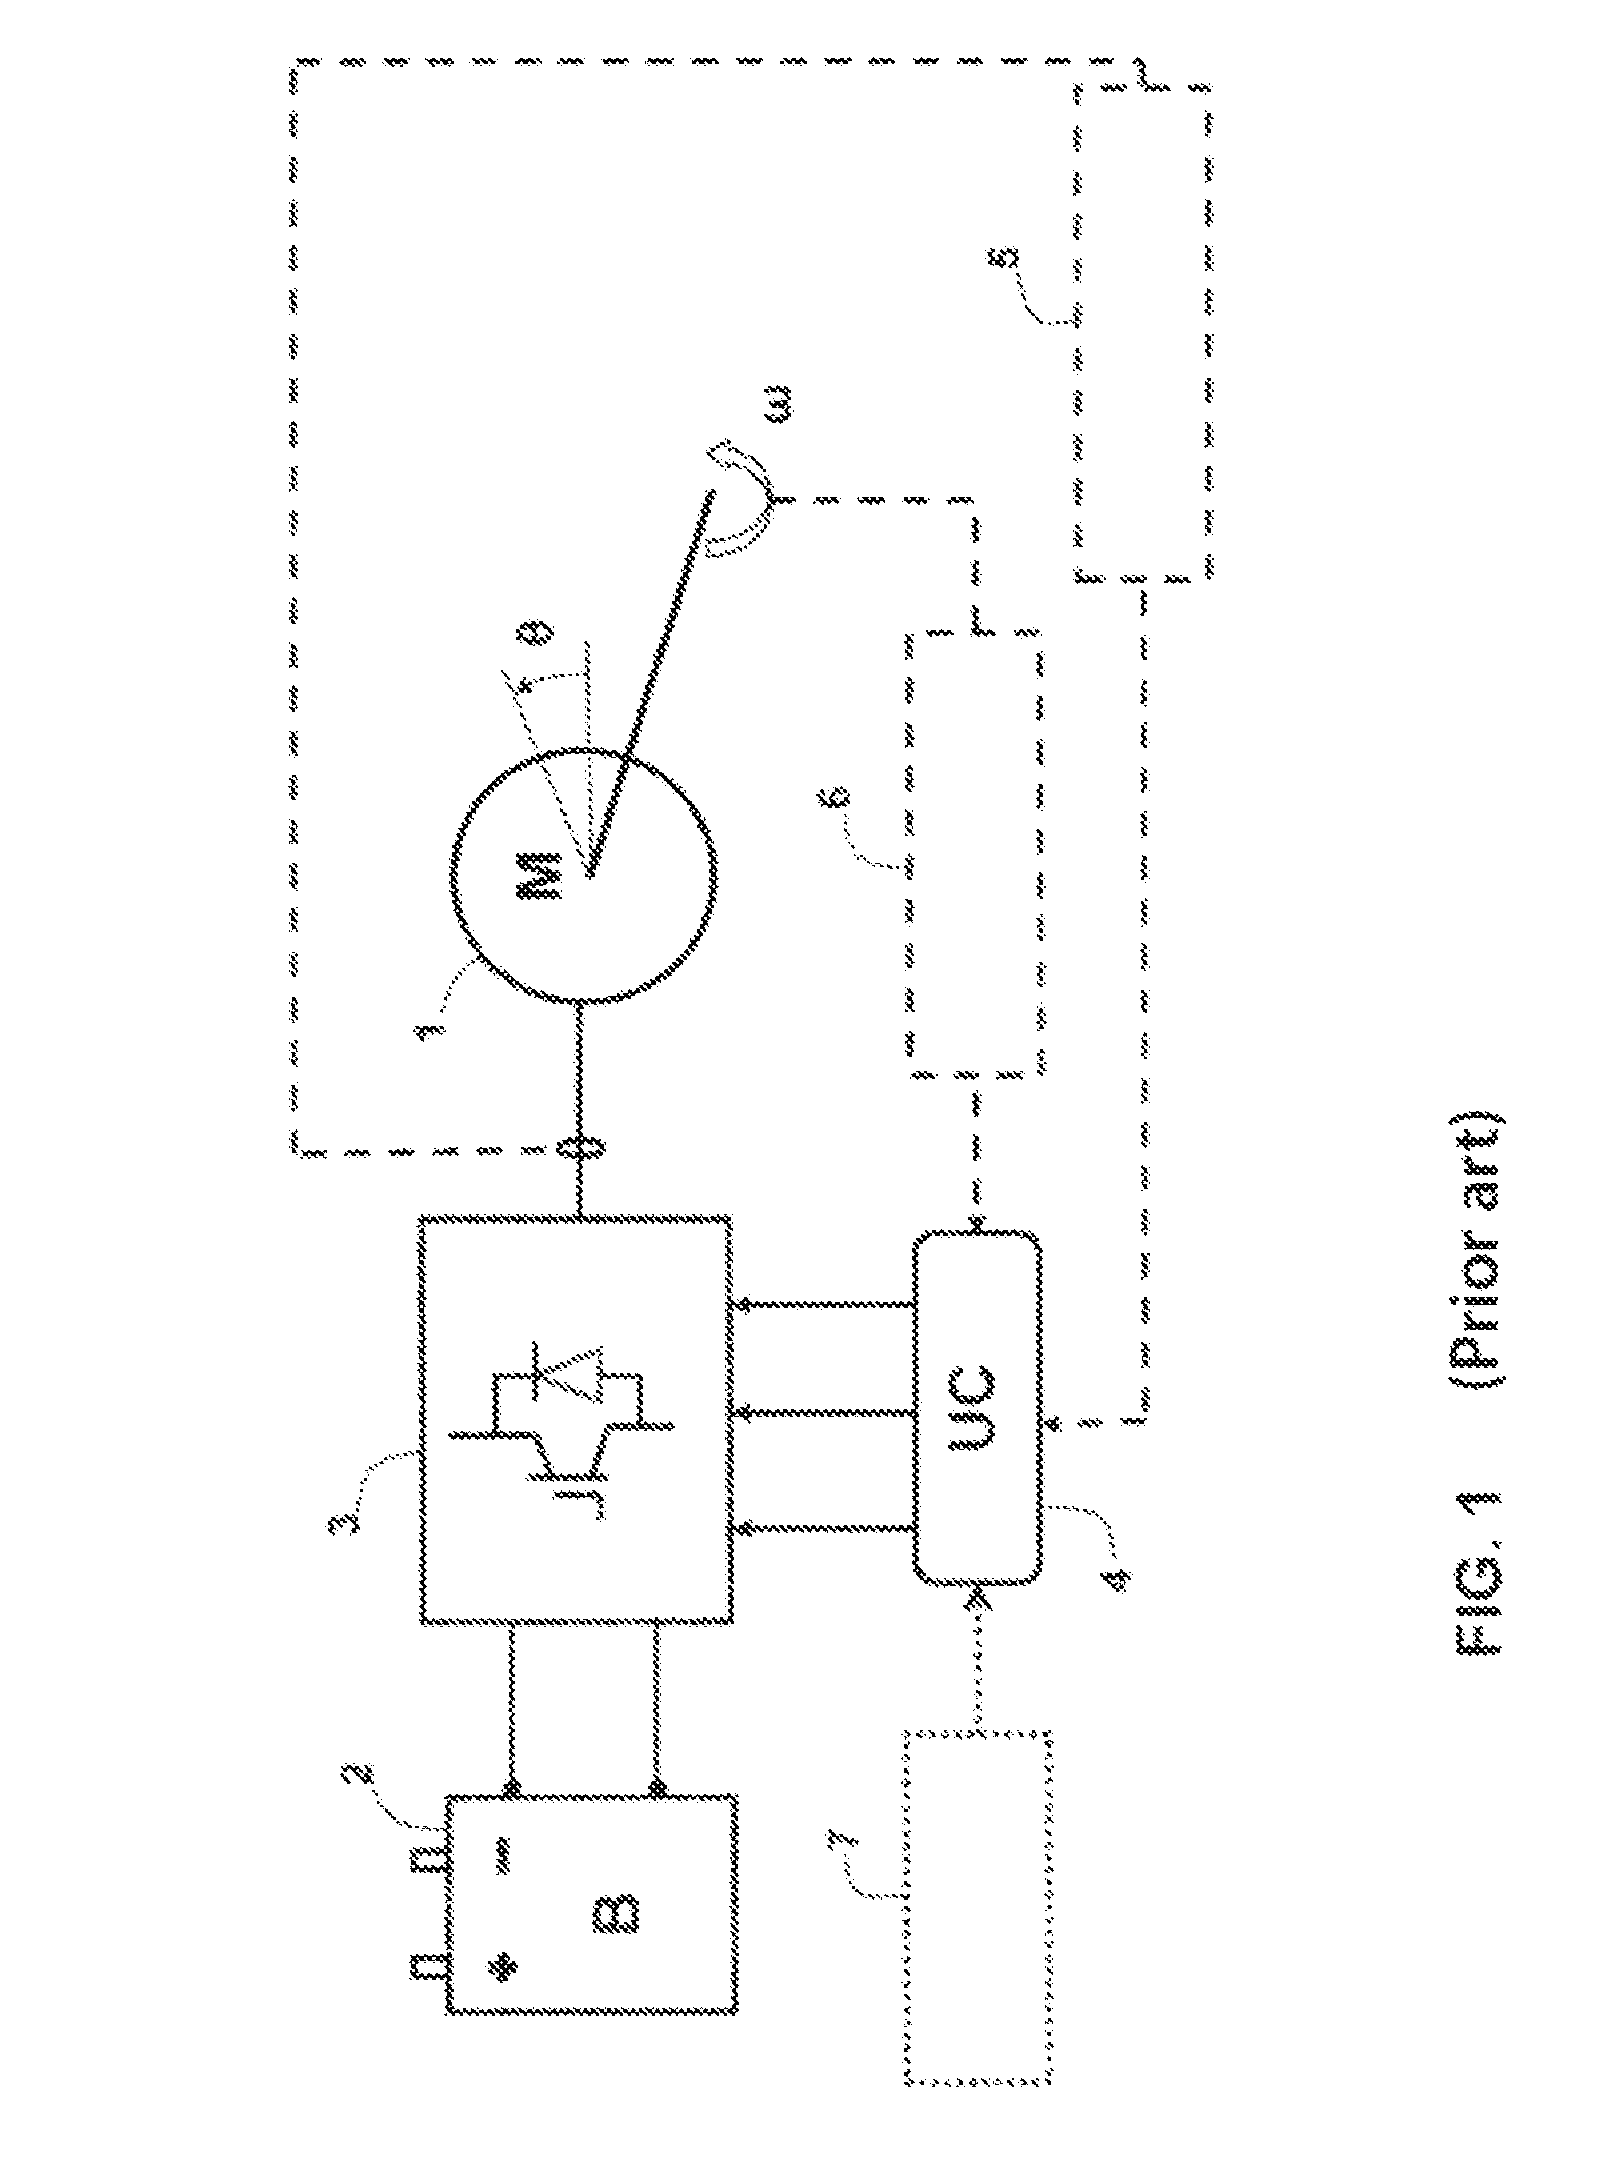 Method for estimating the angular position of the rotor of a polyphase rotary electrical machine, and application to the control of a polyphase inverter for such a machine